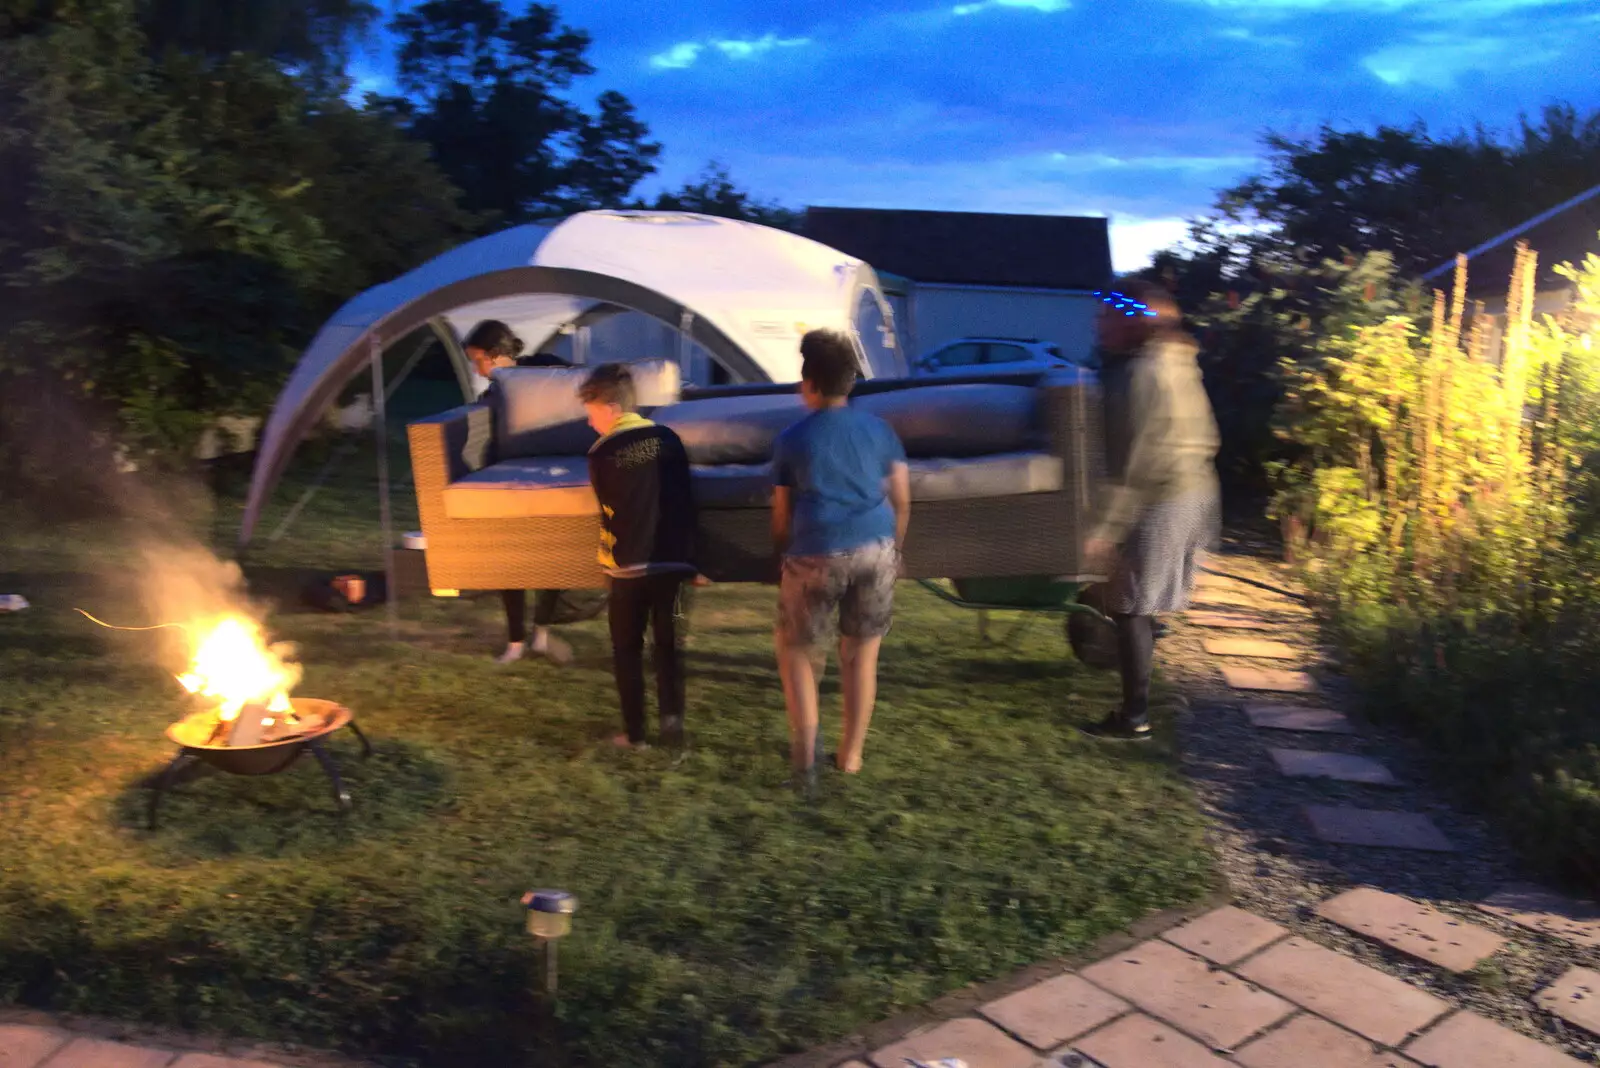 A sofa is moved round to the other side of the fire, from Meg-fest, and Sean Visits, Bressingham and Brome, Suffolk - 1st August 2021